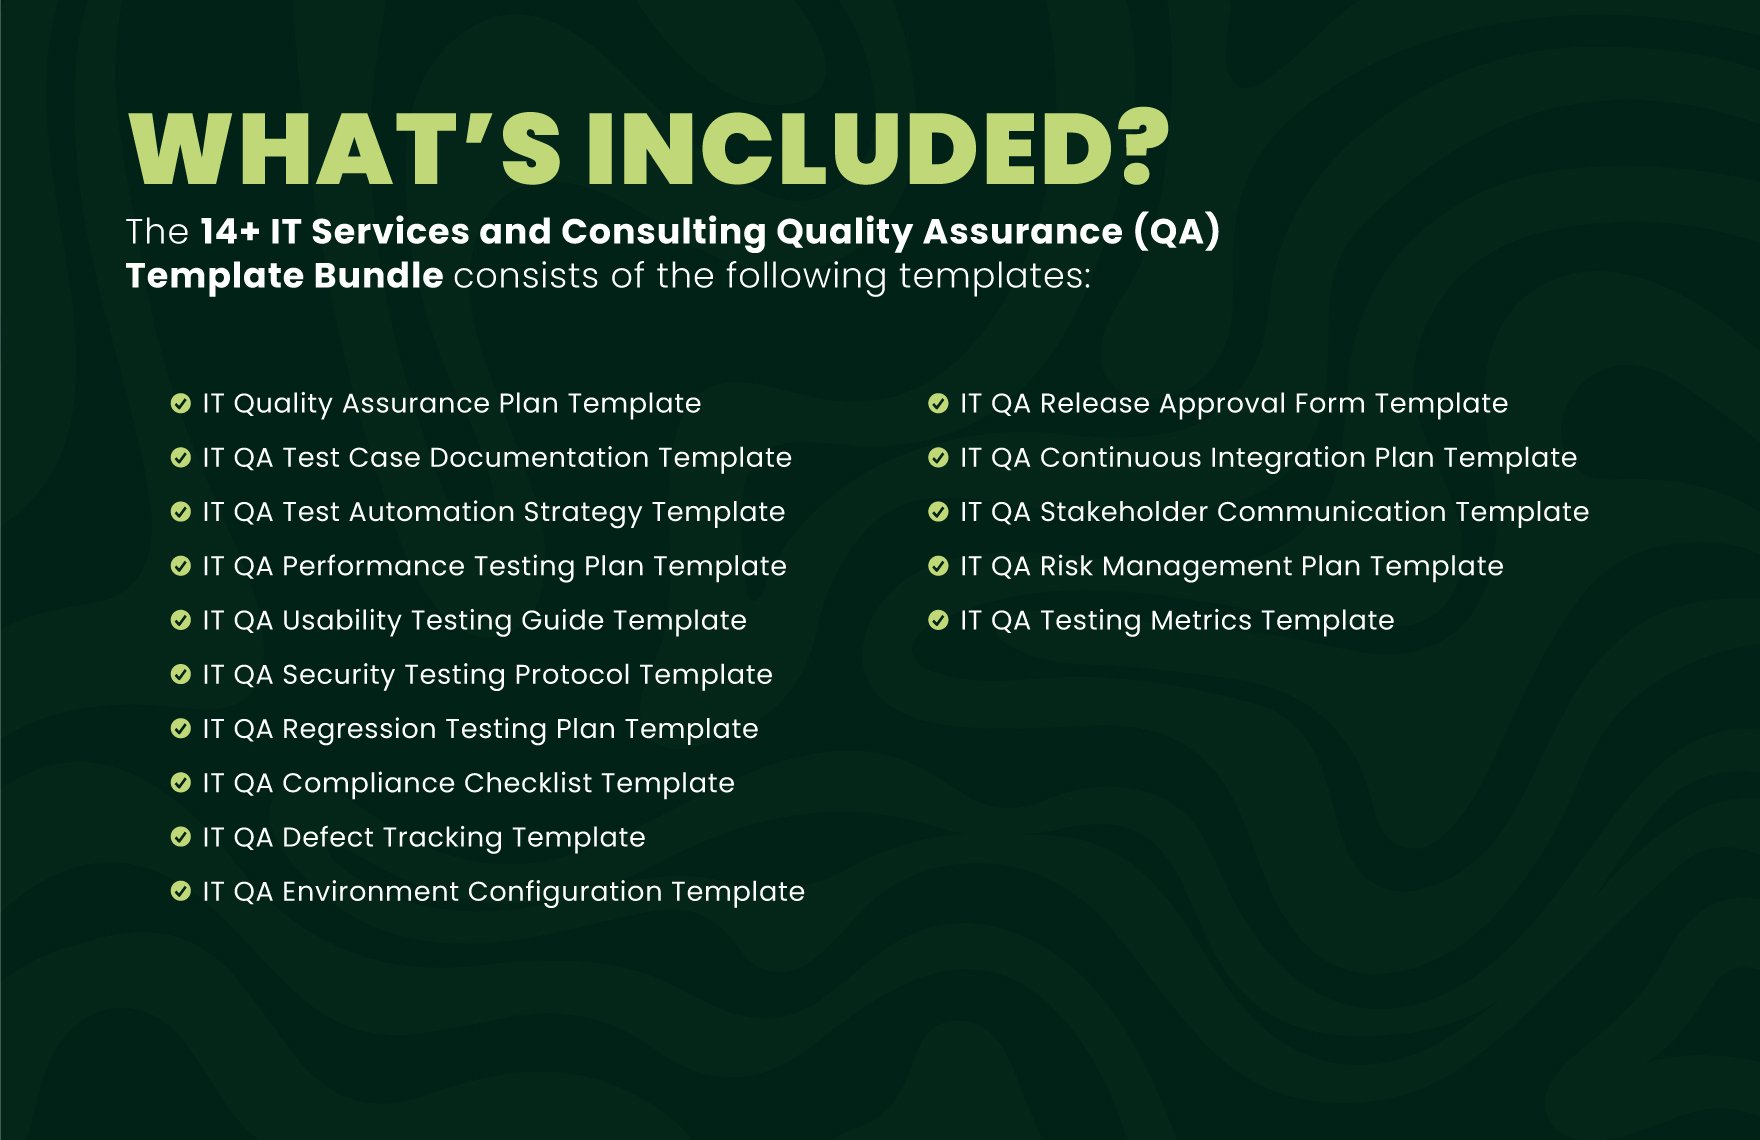 14+ IT Services and Consulting Quality Assurance (QA) Template Bundle